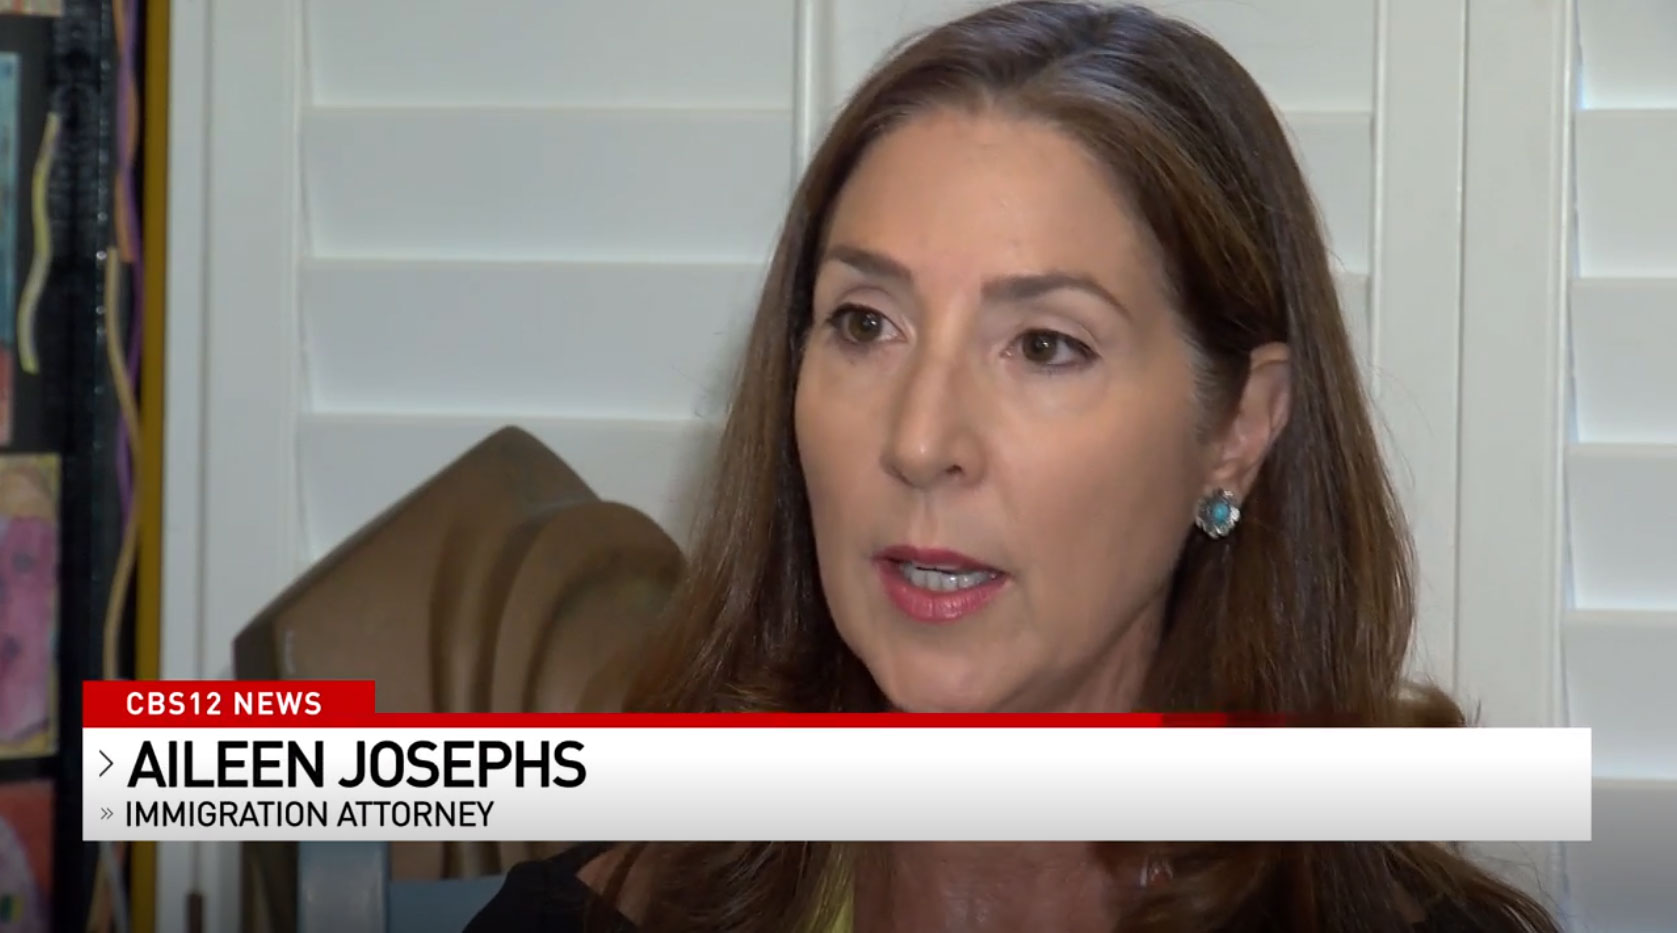 Immigration attorney Aileen Josephs encouraged by just-filed legislation that would allow asylum-seekers to file in their home countries